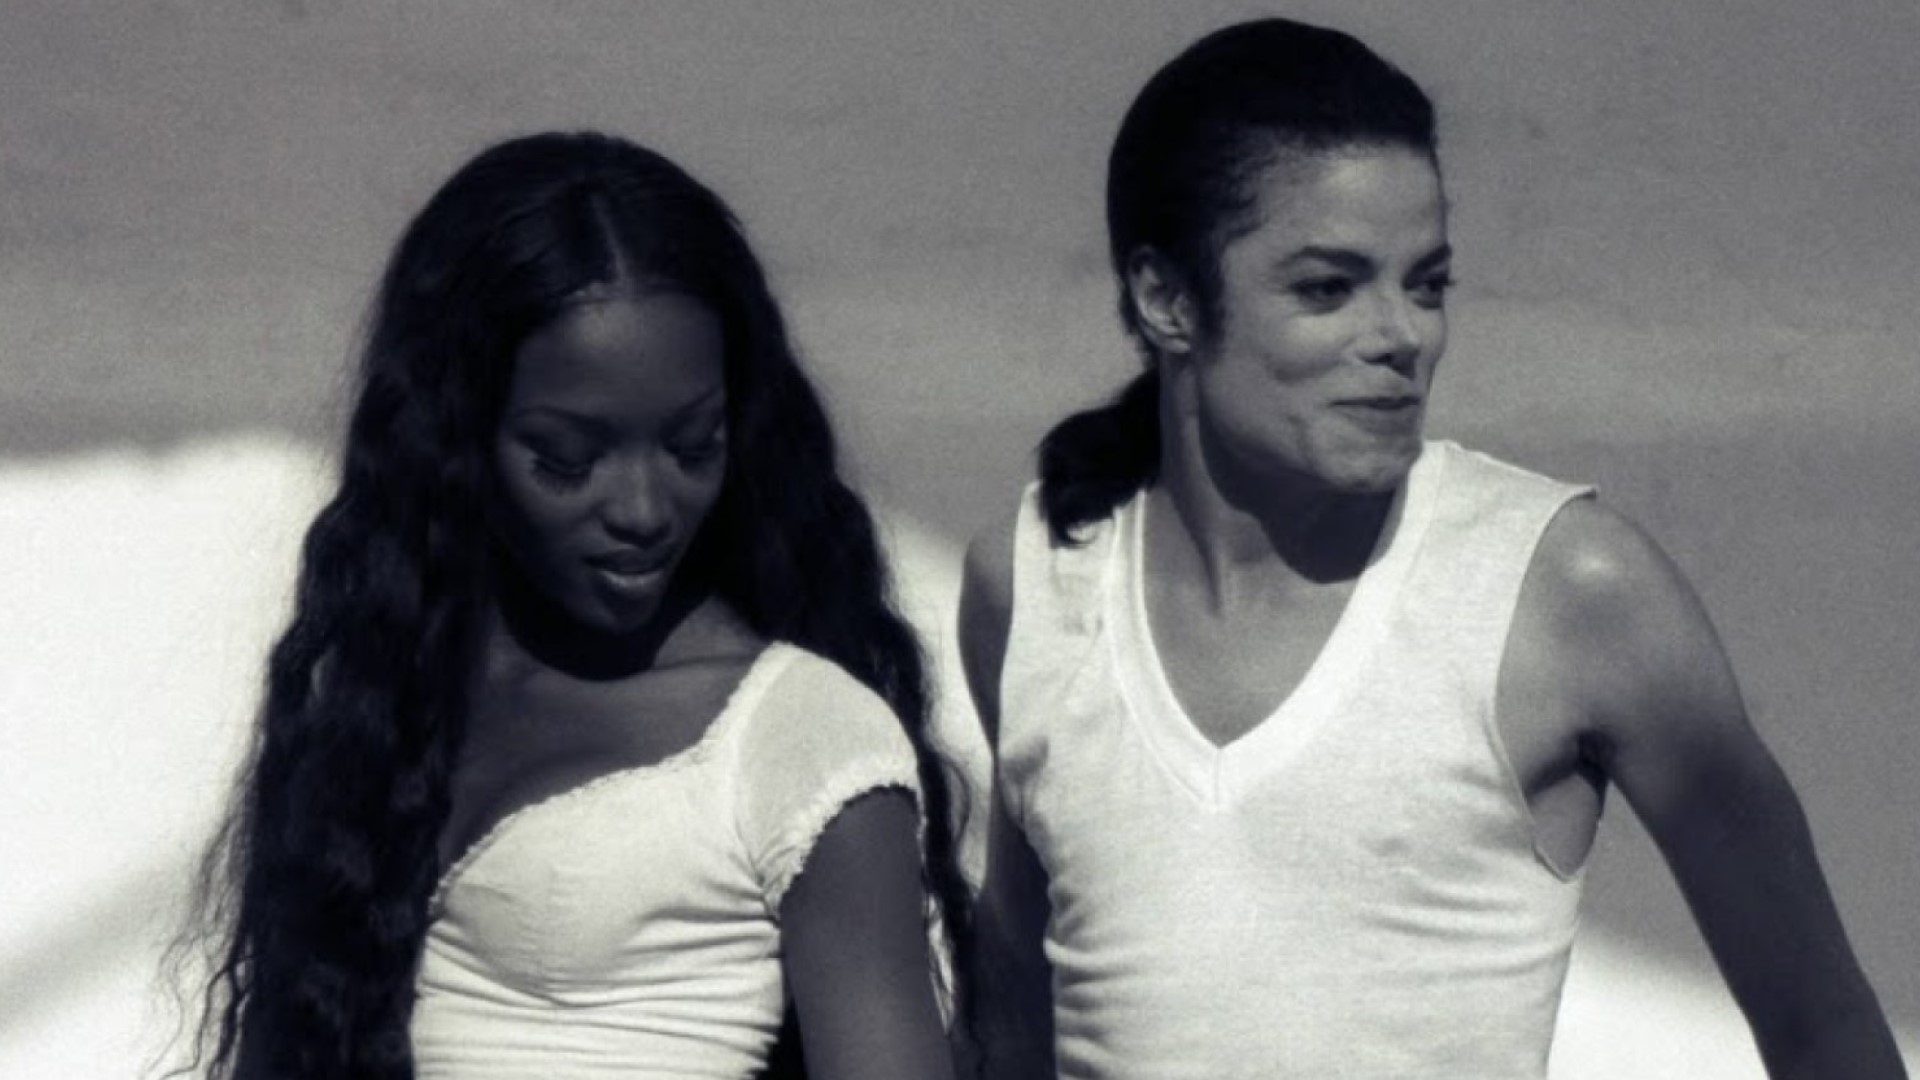 Secret singer of 'In the Closet' with Michael Jackson